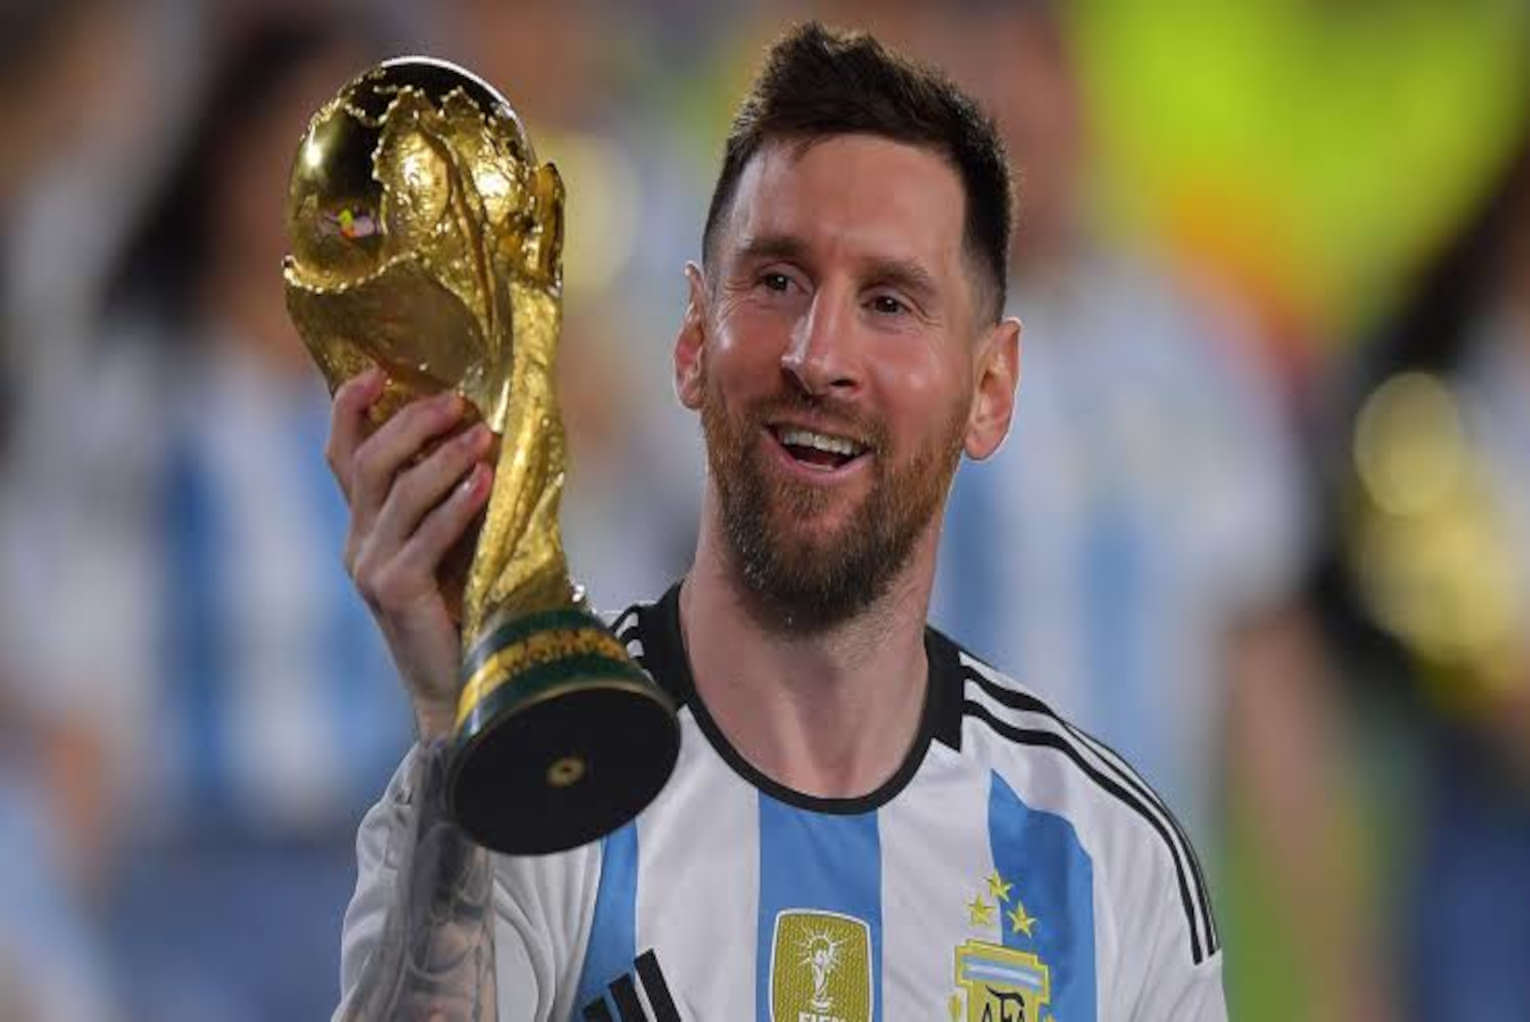 World Cup Star Attributes Historic Career to God